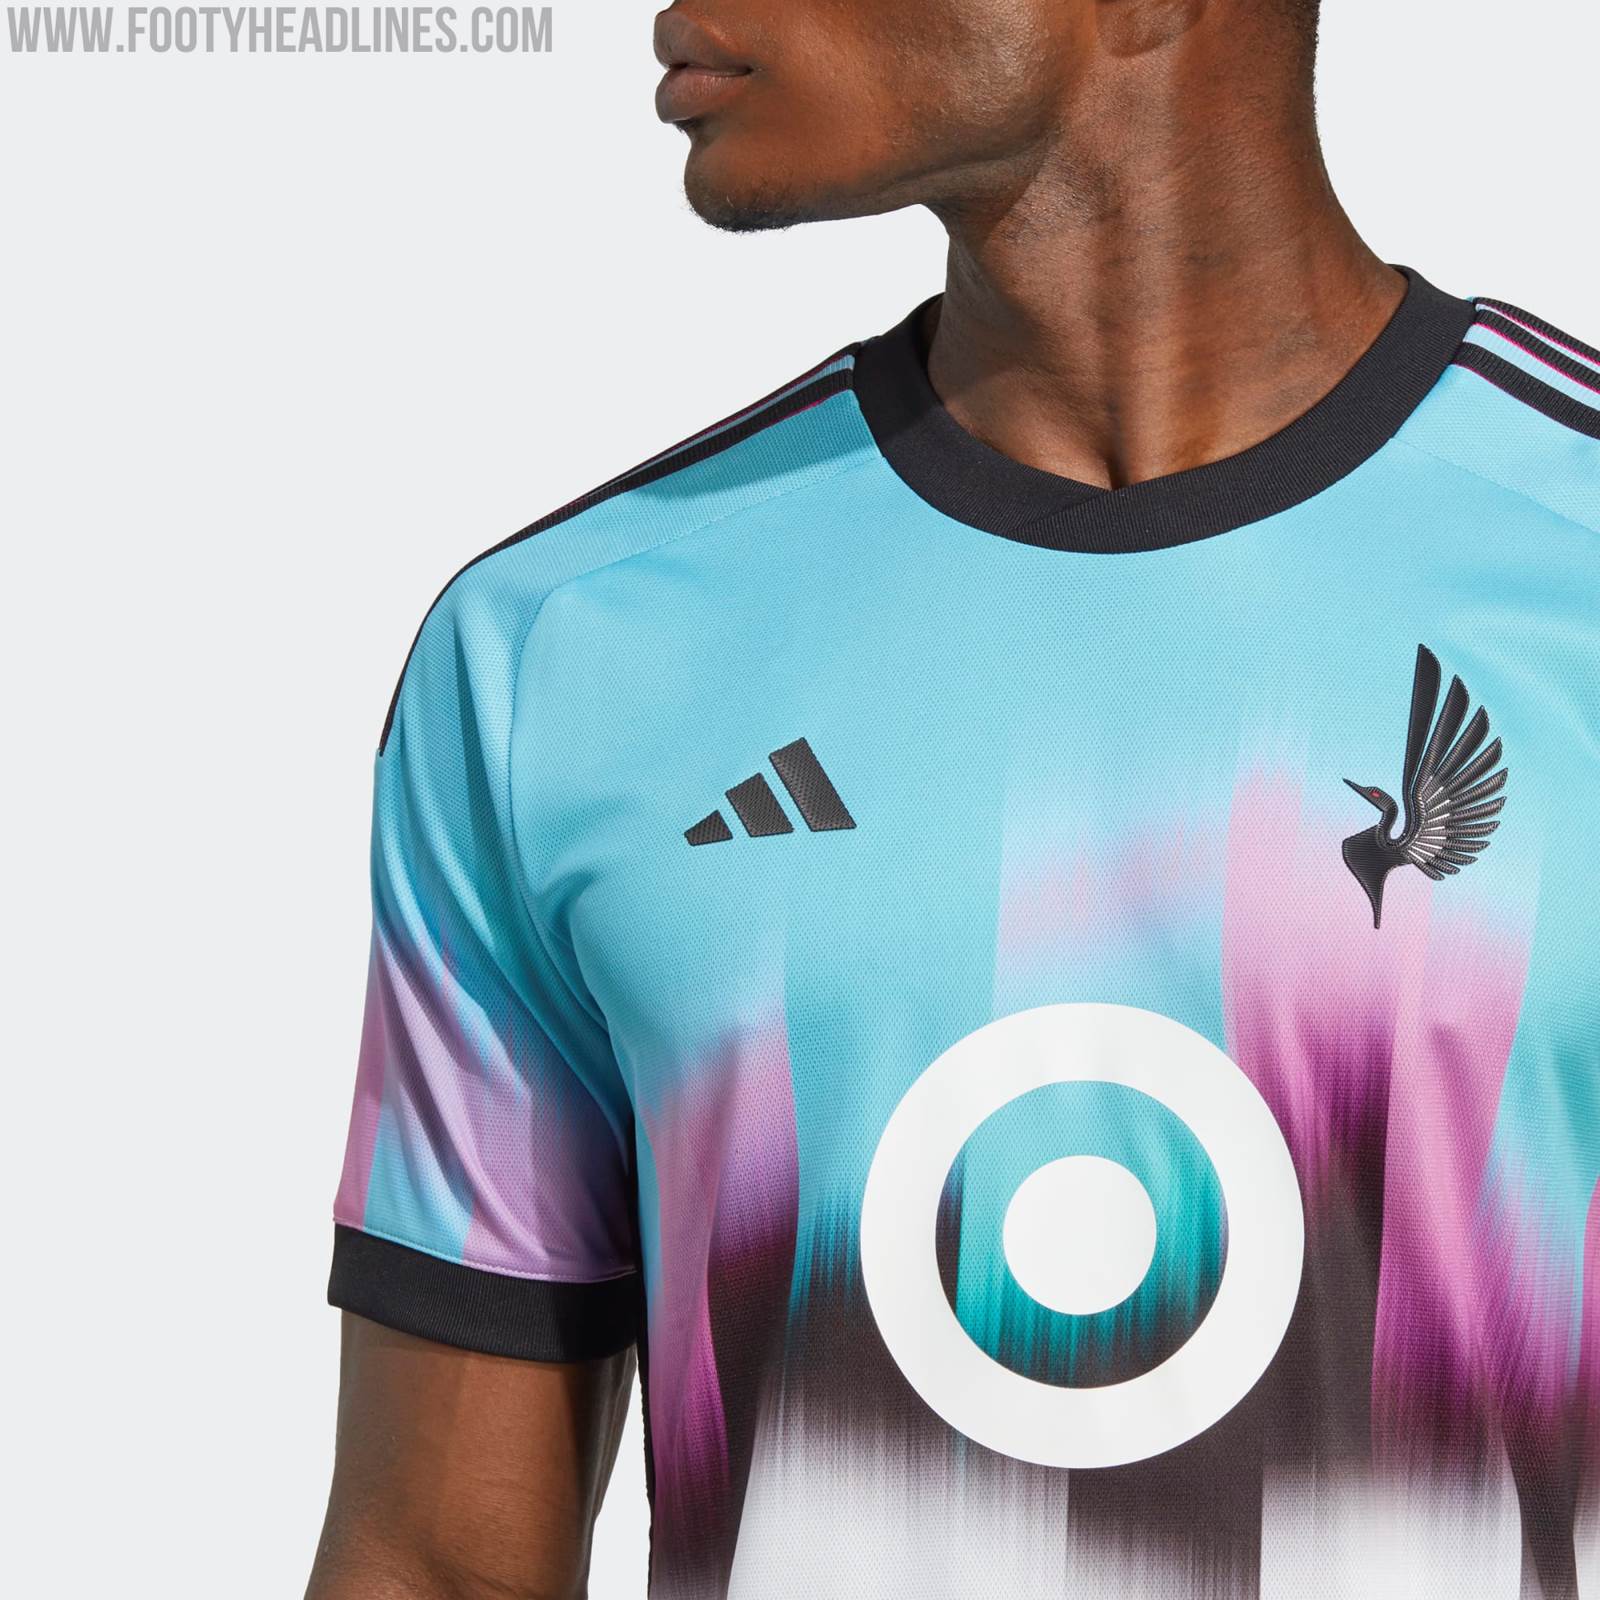 Hybrid Nation to release clothing collection with Minnesota United